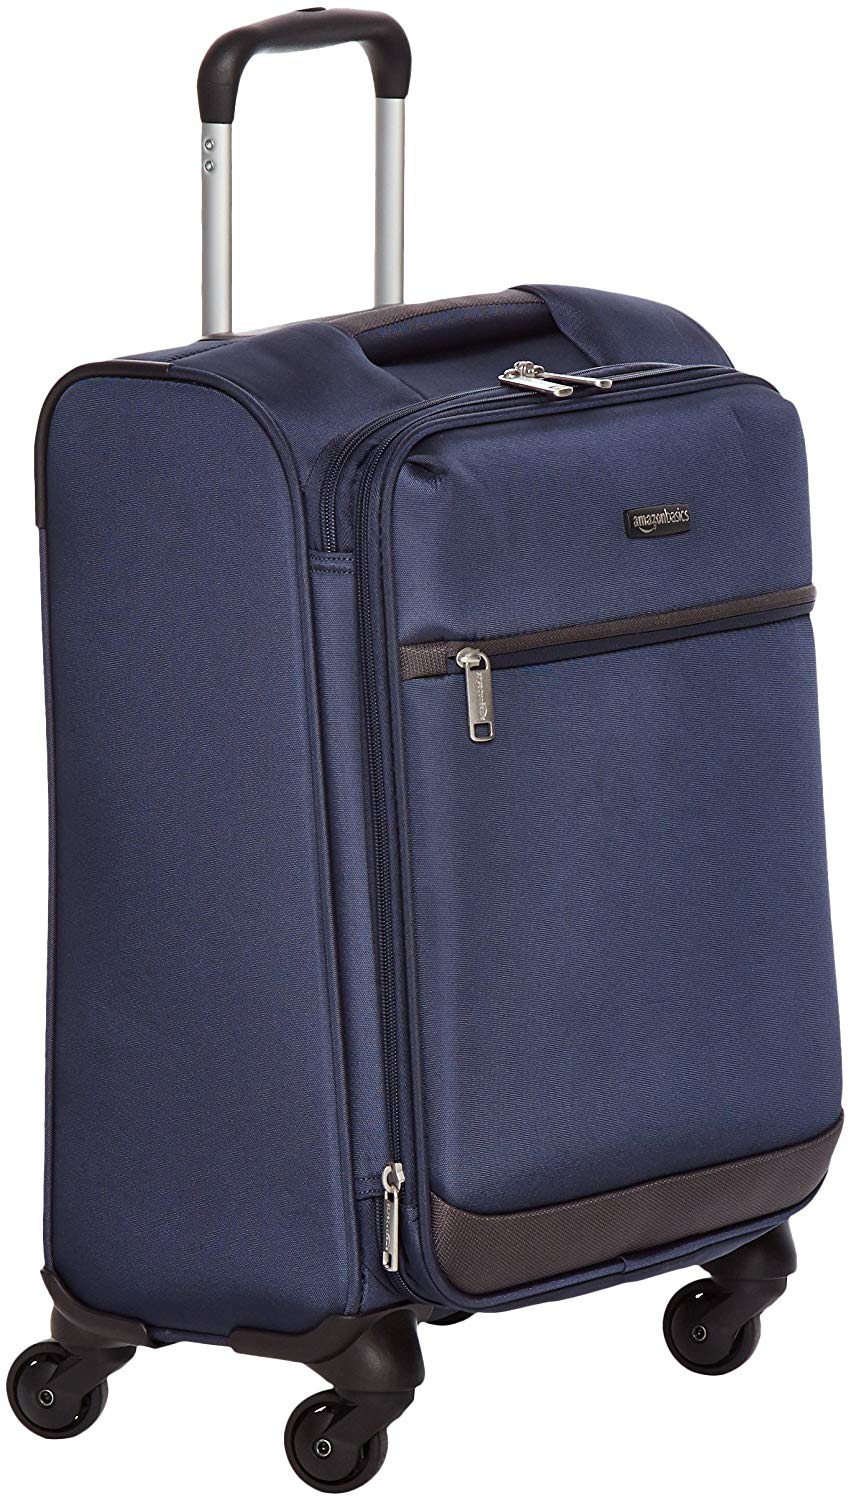 Best Luggage Set Black Friday Deals from Amazon Updated 2022